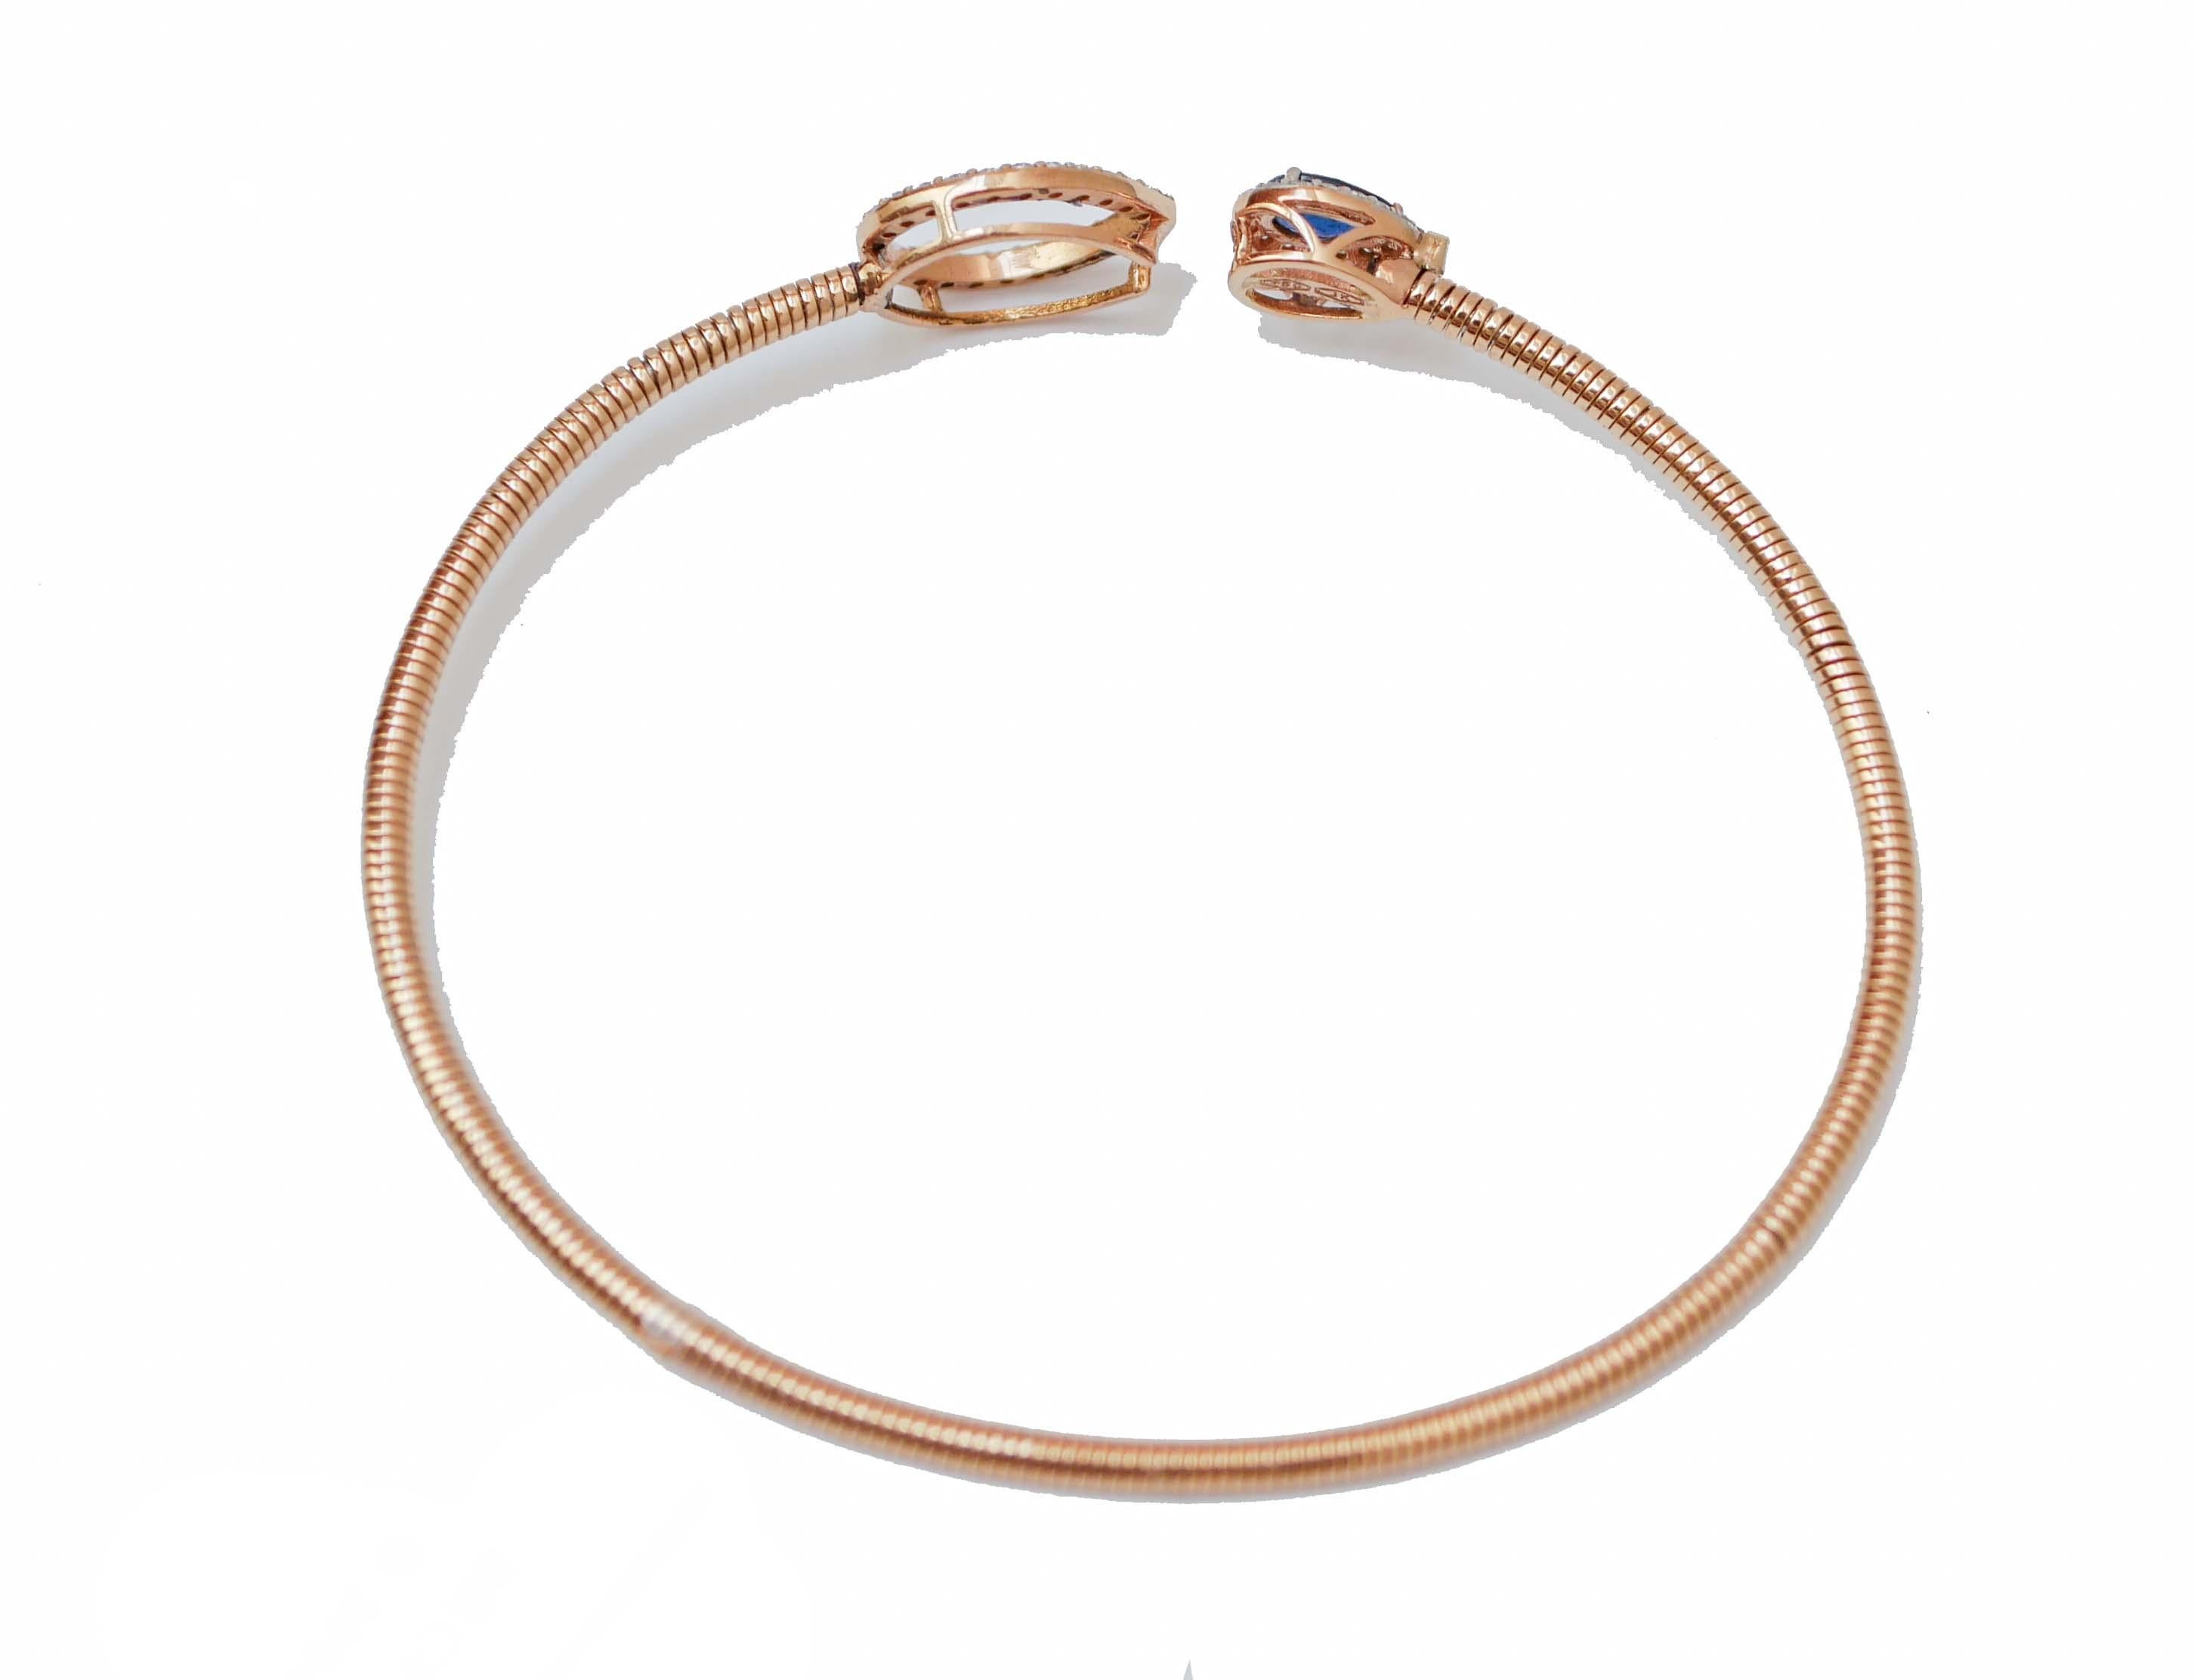 slender studded 18-carat rose-gold cuffs lined with diamonds